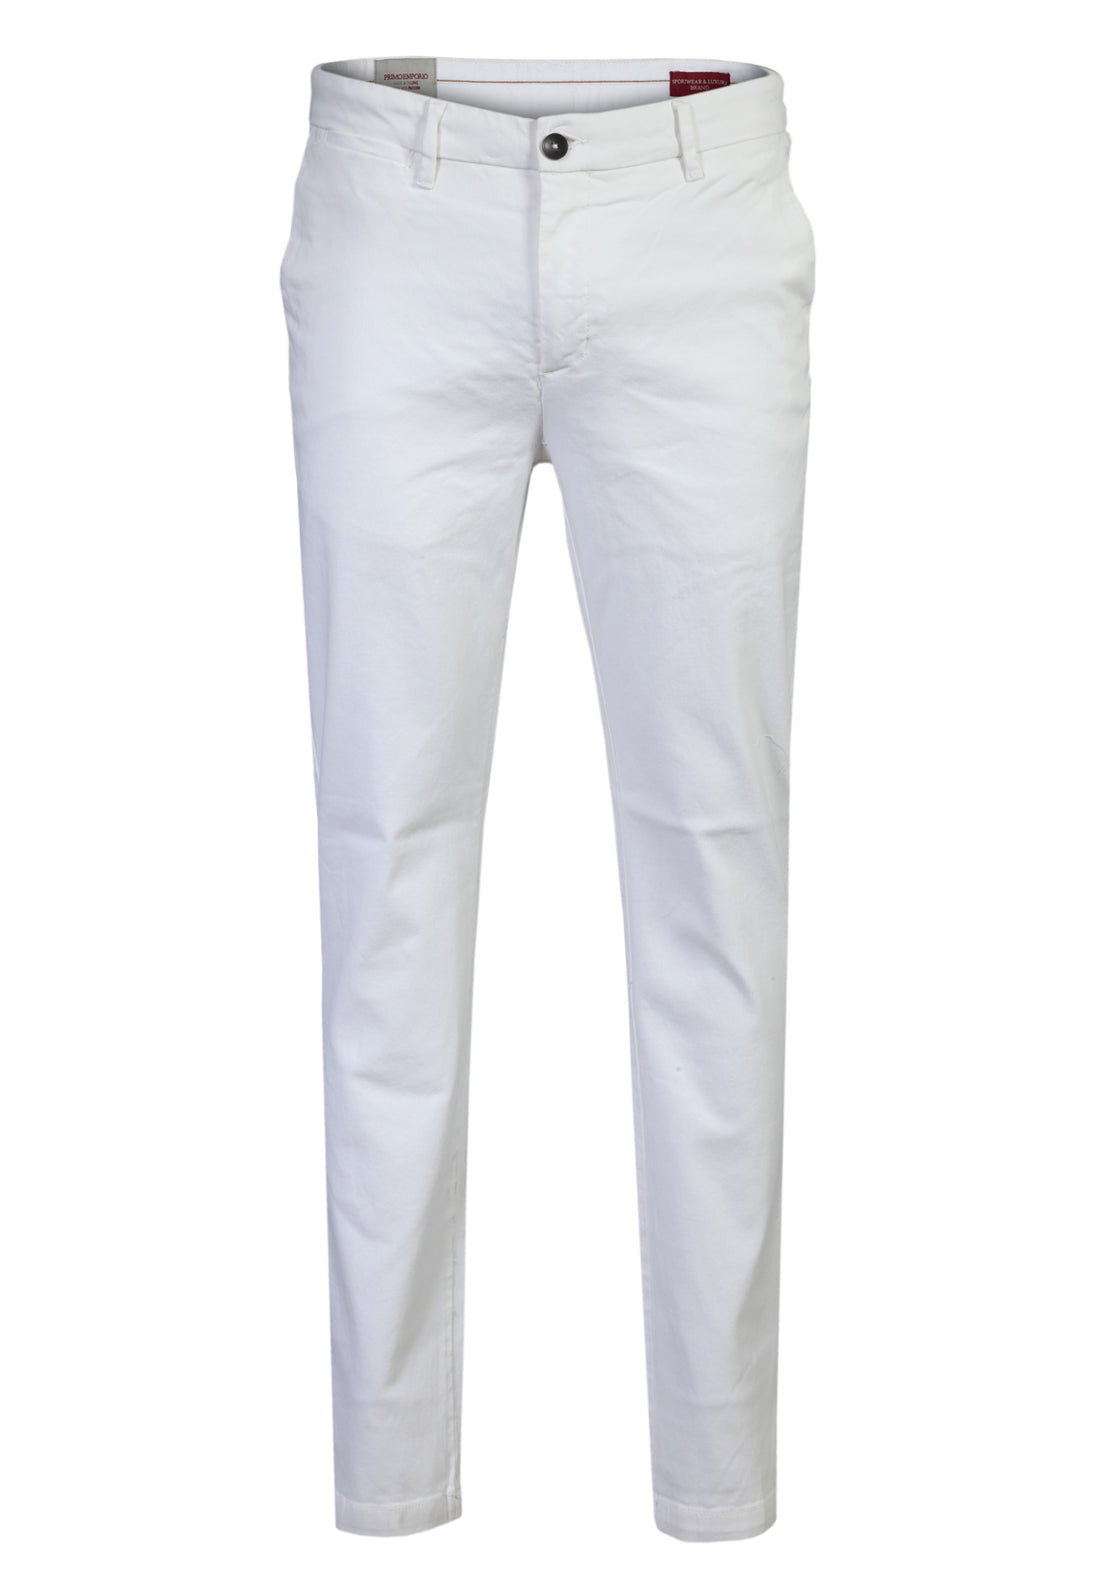 America Pocket Trousers in Warm Woven Cotton - White